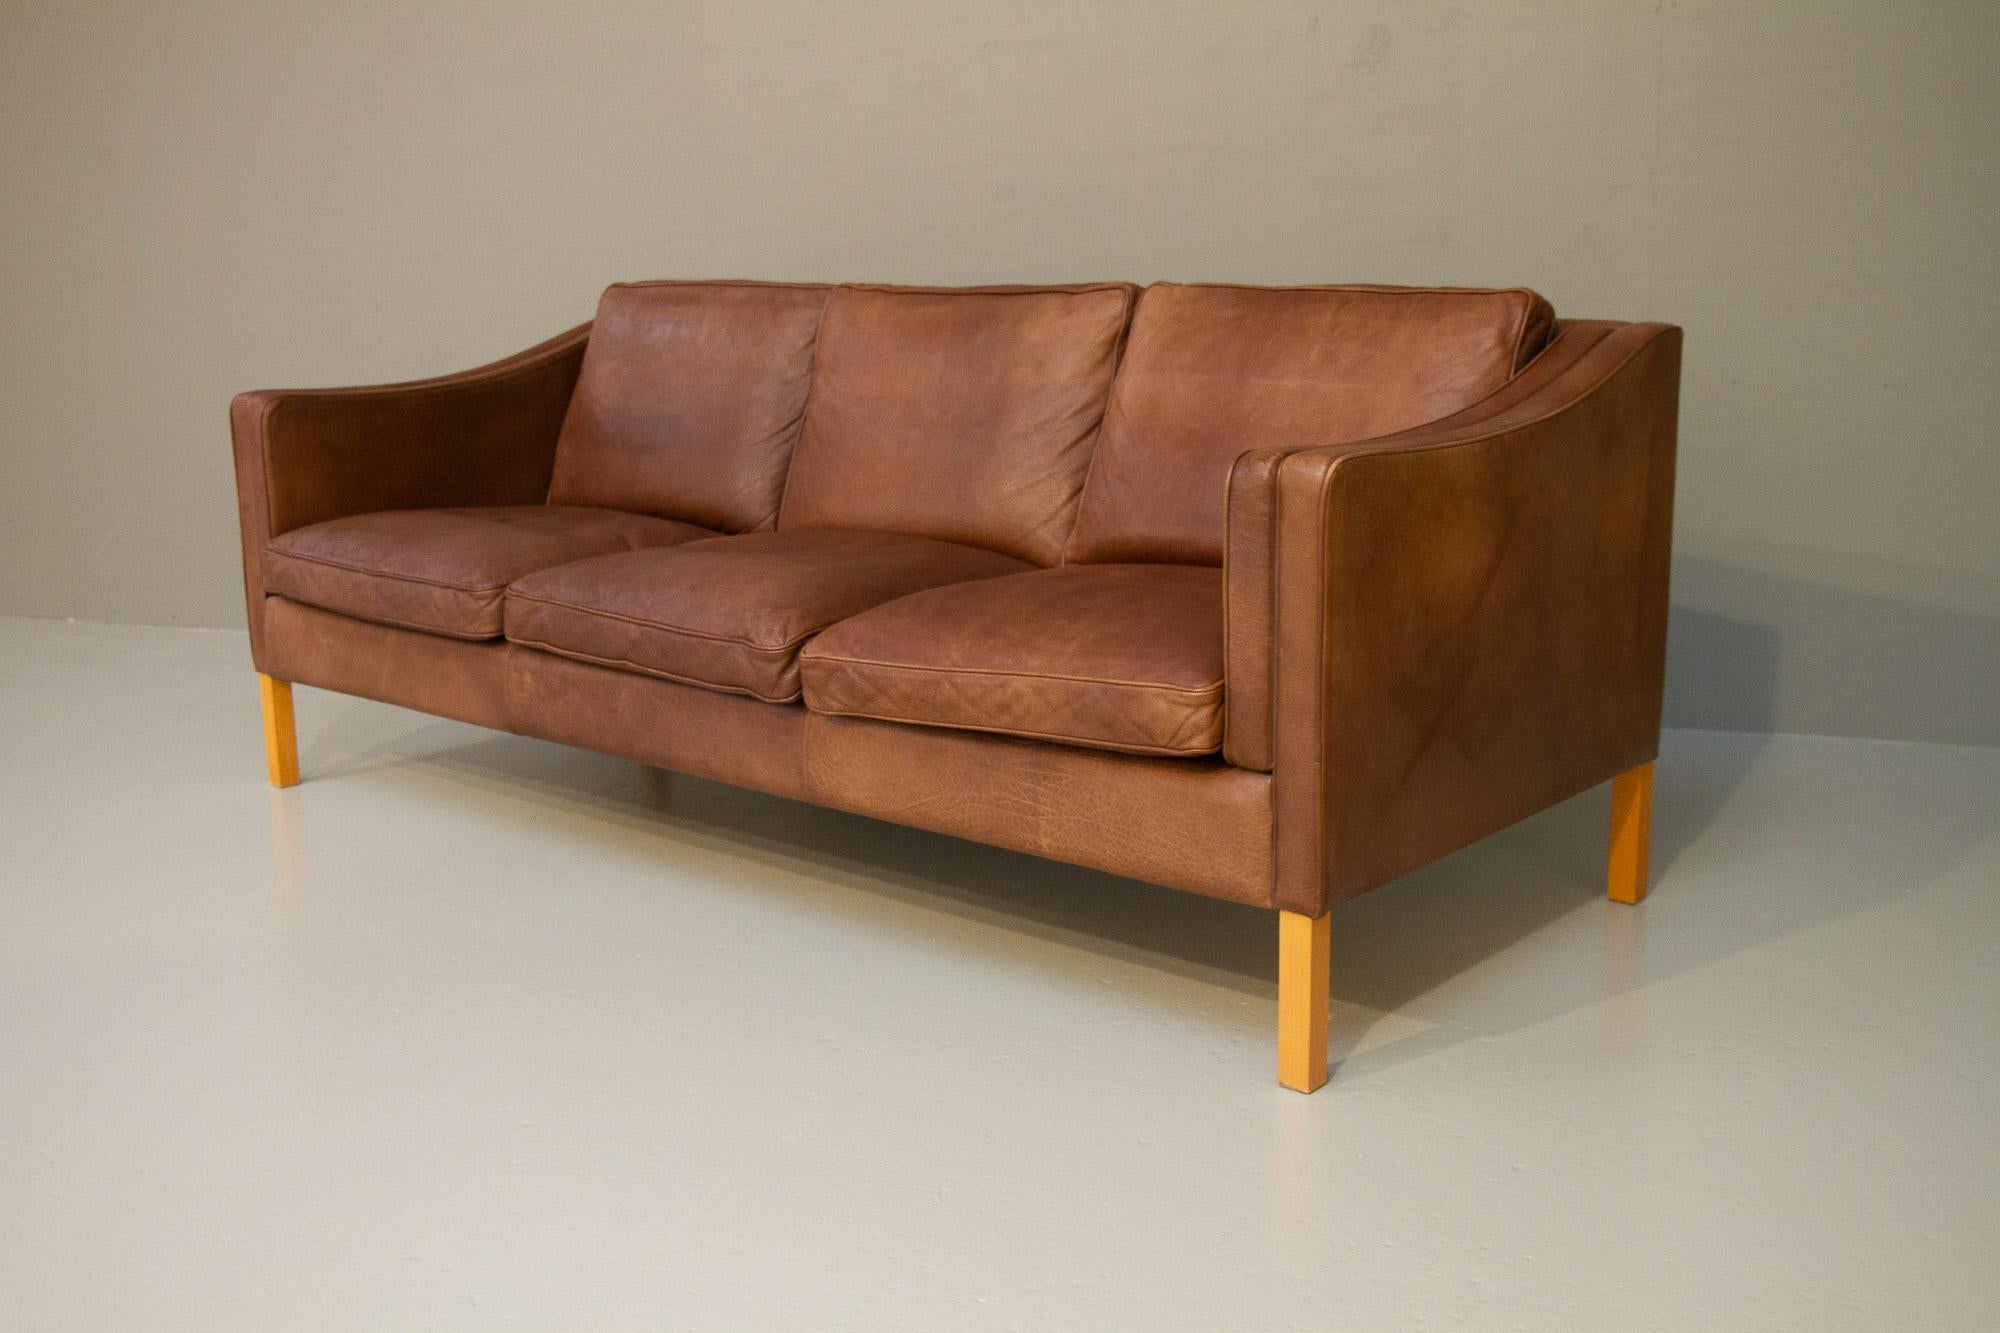 Scandinavian Modern Vintage Danish Leather 3-Seater Sofa by Stouby, 1980s.